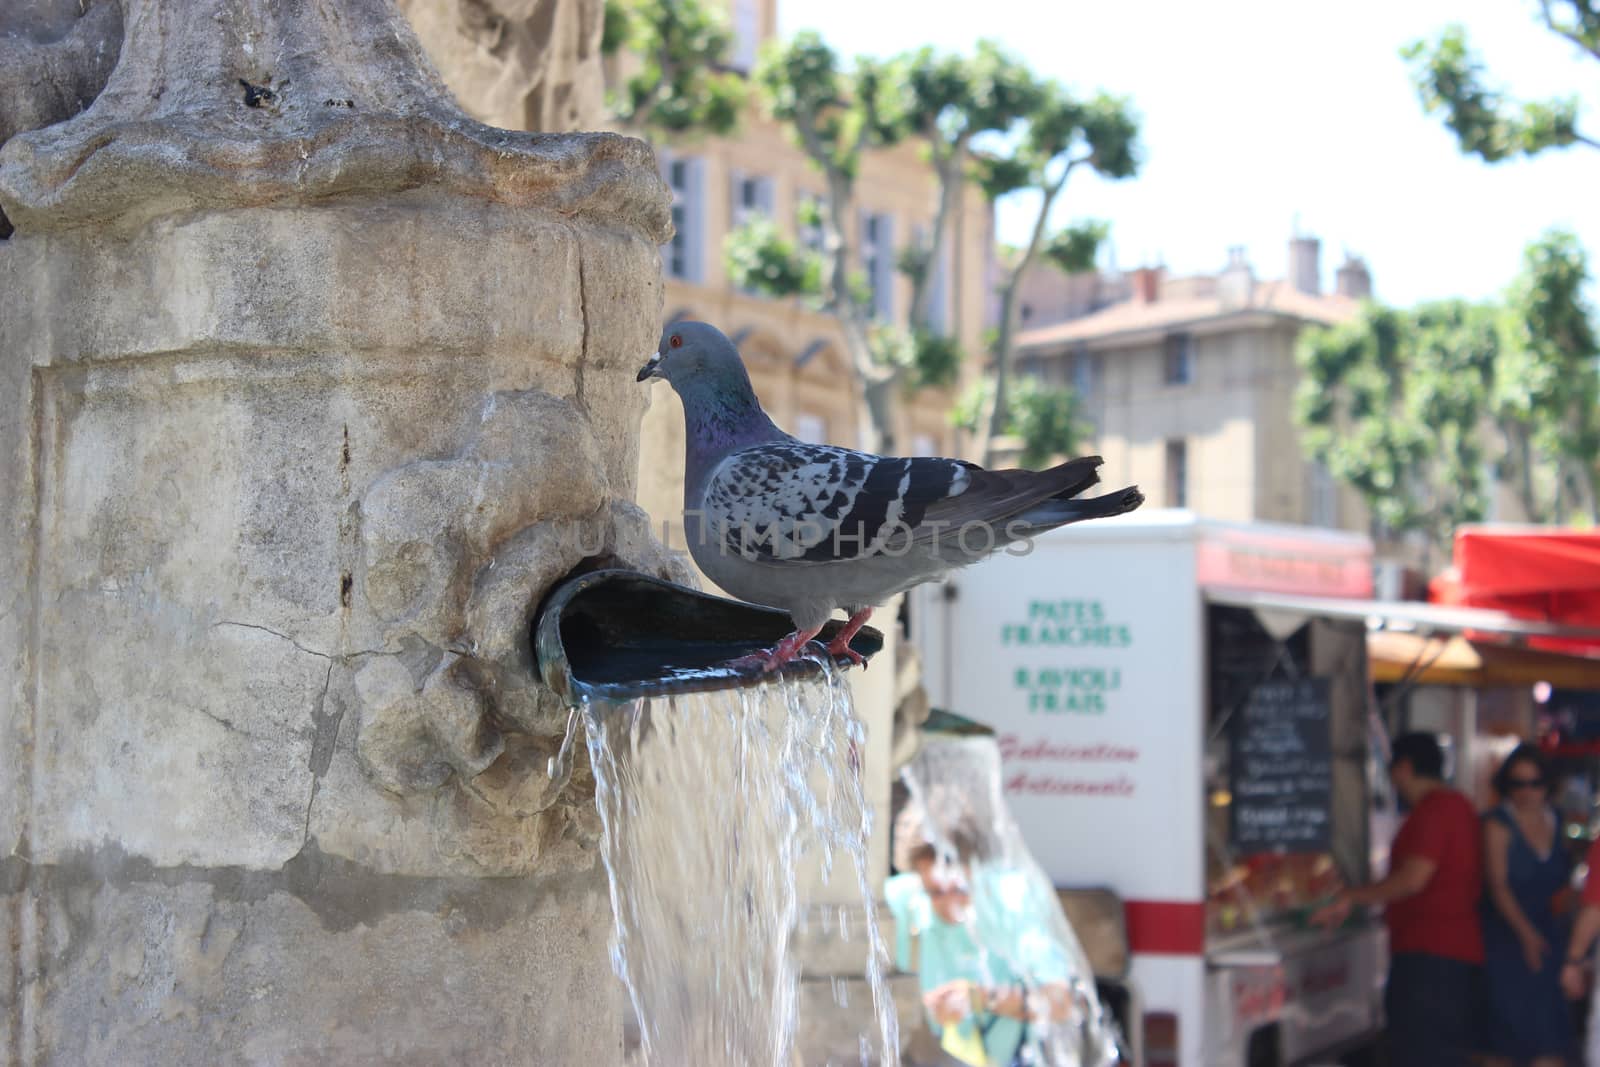 Pigeon standing in water in Fountain by bensib